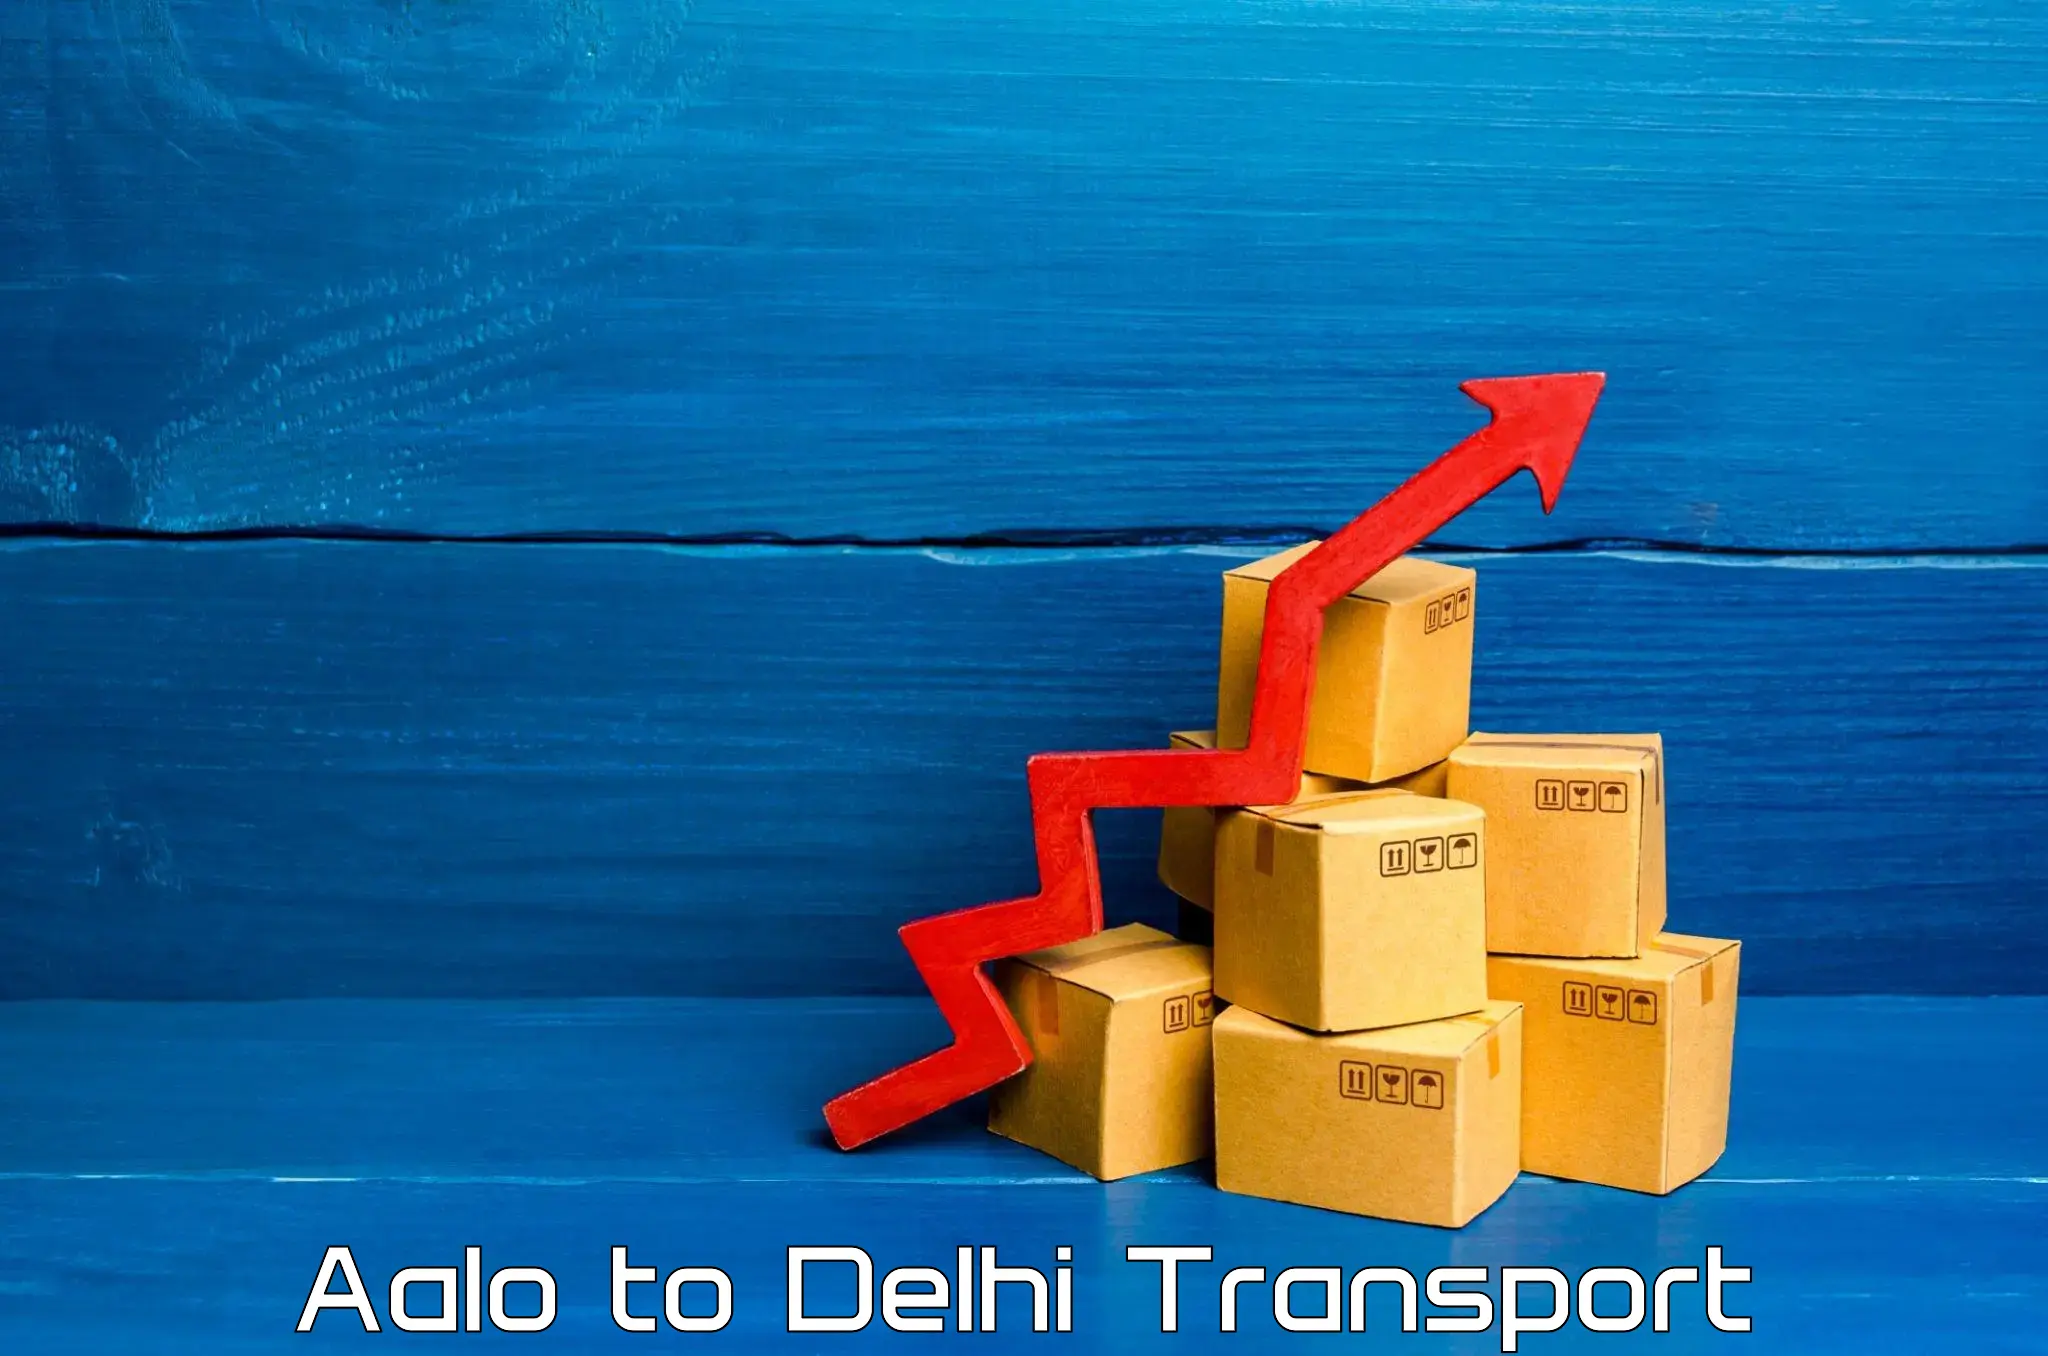 Daily transport service Aalo to Delhi